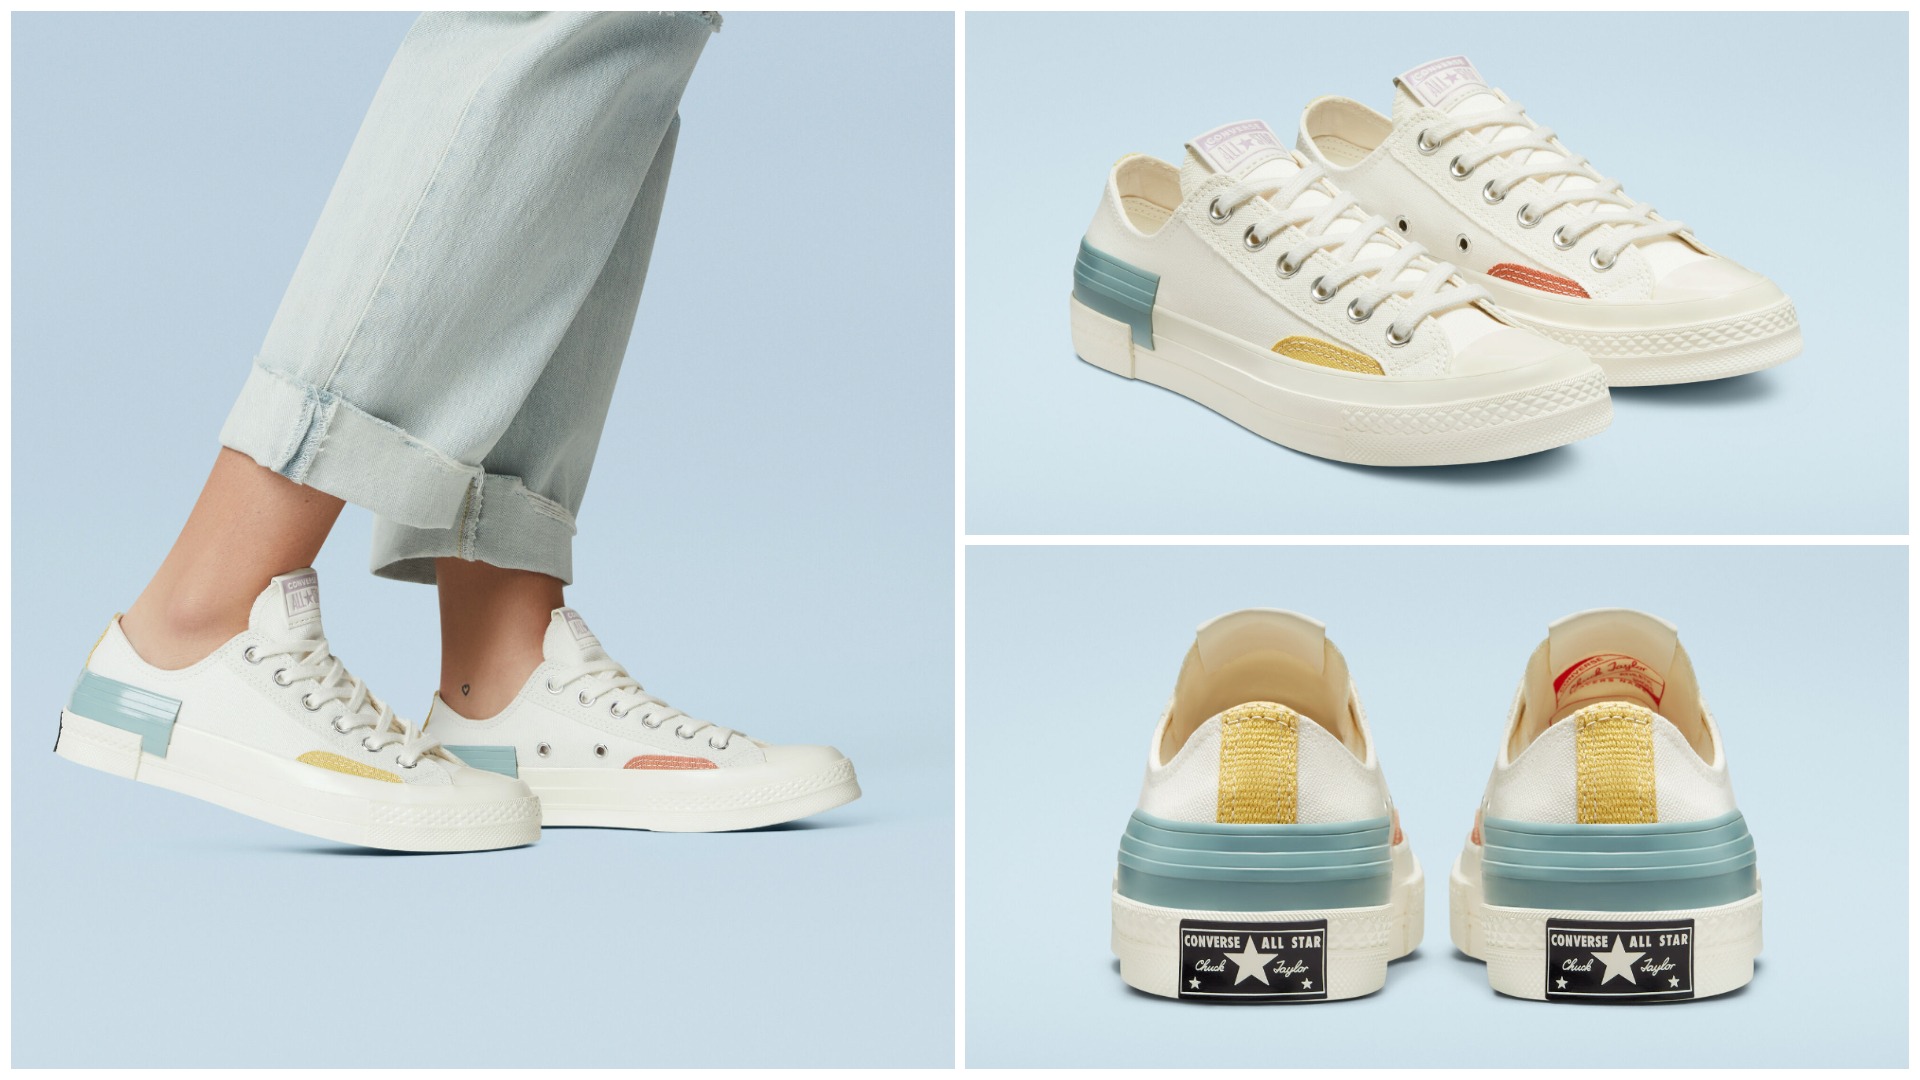 Say ‘Hello’ to the Dreamy, Classic Converse Sneakers